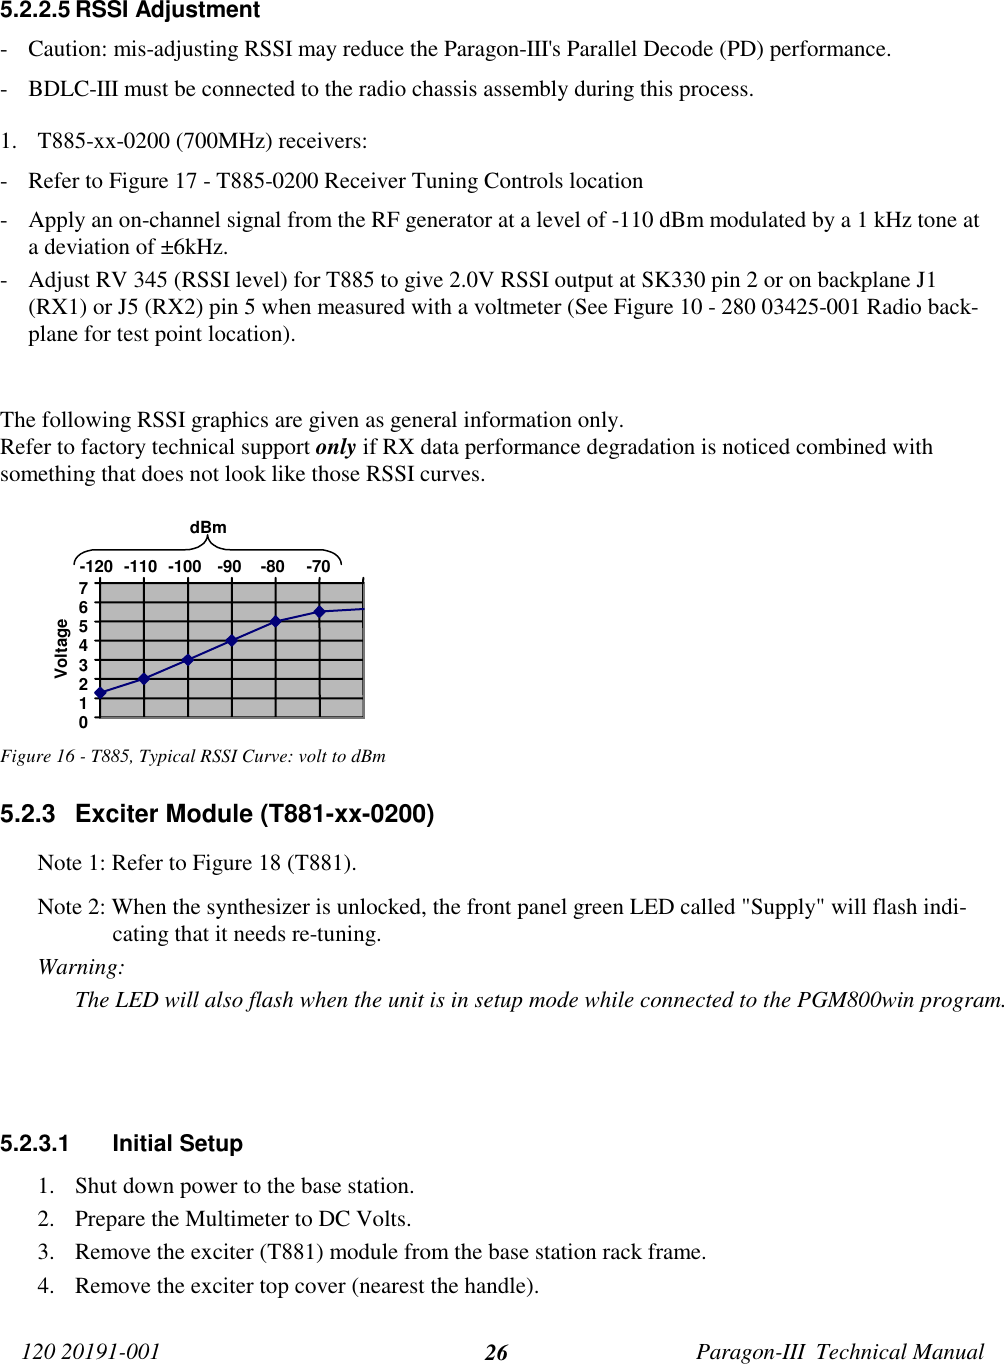 120 20191-001 Paragon-III  Technical Manual265.2.2.5 RSSI Adjustment- Caution: mis-adjusting RSSI may reduce the Paragon-III&apos;s Parallel Decode (PD) performance.- BDLC-III must be connected to the radio chassis assembly during this process.1. T885-xx-0200 (700MHz) receivers:- Refer to Figure 17 - T885-0200 Receiver Tuning Controls location- Apply an on-channel signal from the RF generator at a level of -110 dBm modulated by a 1 kHz tone ata deviation of ±6kHz.- Adjust RV 345 (RSSI level) for T885 to give 2.0V RSSI output at SK330 pin 2 or on backplane J1(RX1) or J5 (RX2) pin 5 when measured with a voltmeter (See Figure 10 - 280 03425-001 Radio back-plane for test point location).The following RSSI graphics are given as general information only.Refer to factory technical support only if RX data performance degradation is noticed combined withsomething that does not look like those RSSI curves.Figure 16 - T885, Typical RSSI Curve: volt to dBm5.2.3  Exciter Module (T881-xx-0200)Note 1: Refer to Figure 18 (T881).Note 2: When the synthesizer is unlocked, the front panel green LED called &quot;Supply&quot; will flash indi-cating that it needs re-tuning.Warning: The LED will also flash when the unit is in setup mode while connected to the PGM800win program.5.2.3.1 Initial Setup1. Shut down power to the base station.2. Prepare the Multimeter to DC Volts.3. Remove the exciter (T881) module from the base station rack frame.4. Remove the exciter top cover (nearest the handle).01234567-120 -110 -100 -90 -80 -70dBmVoltage